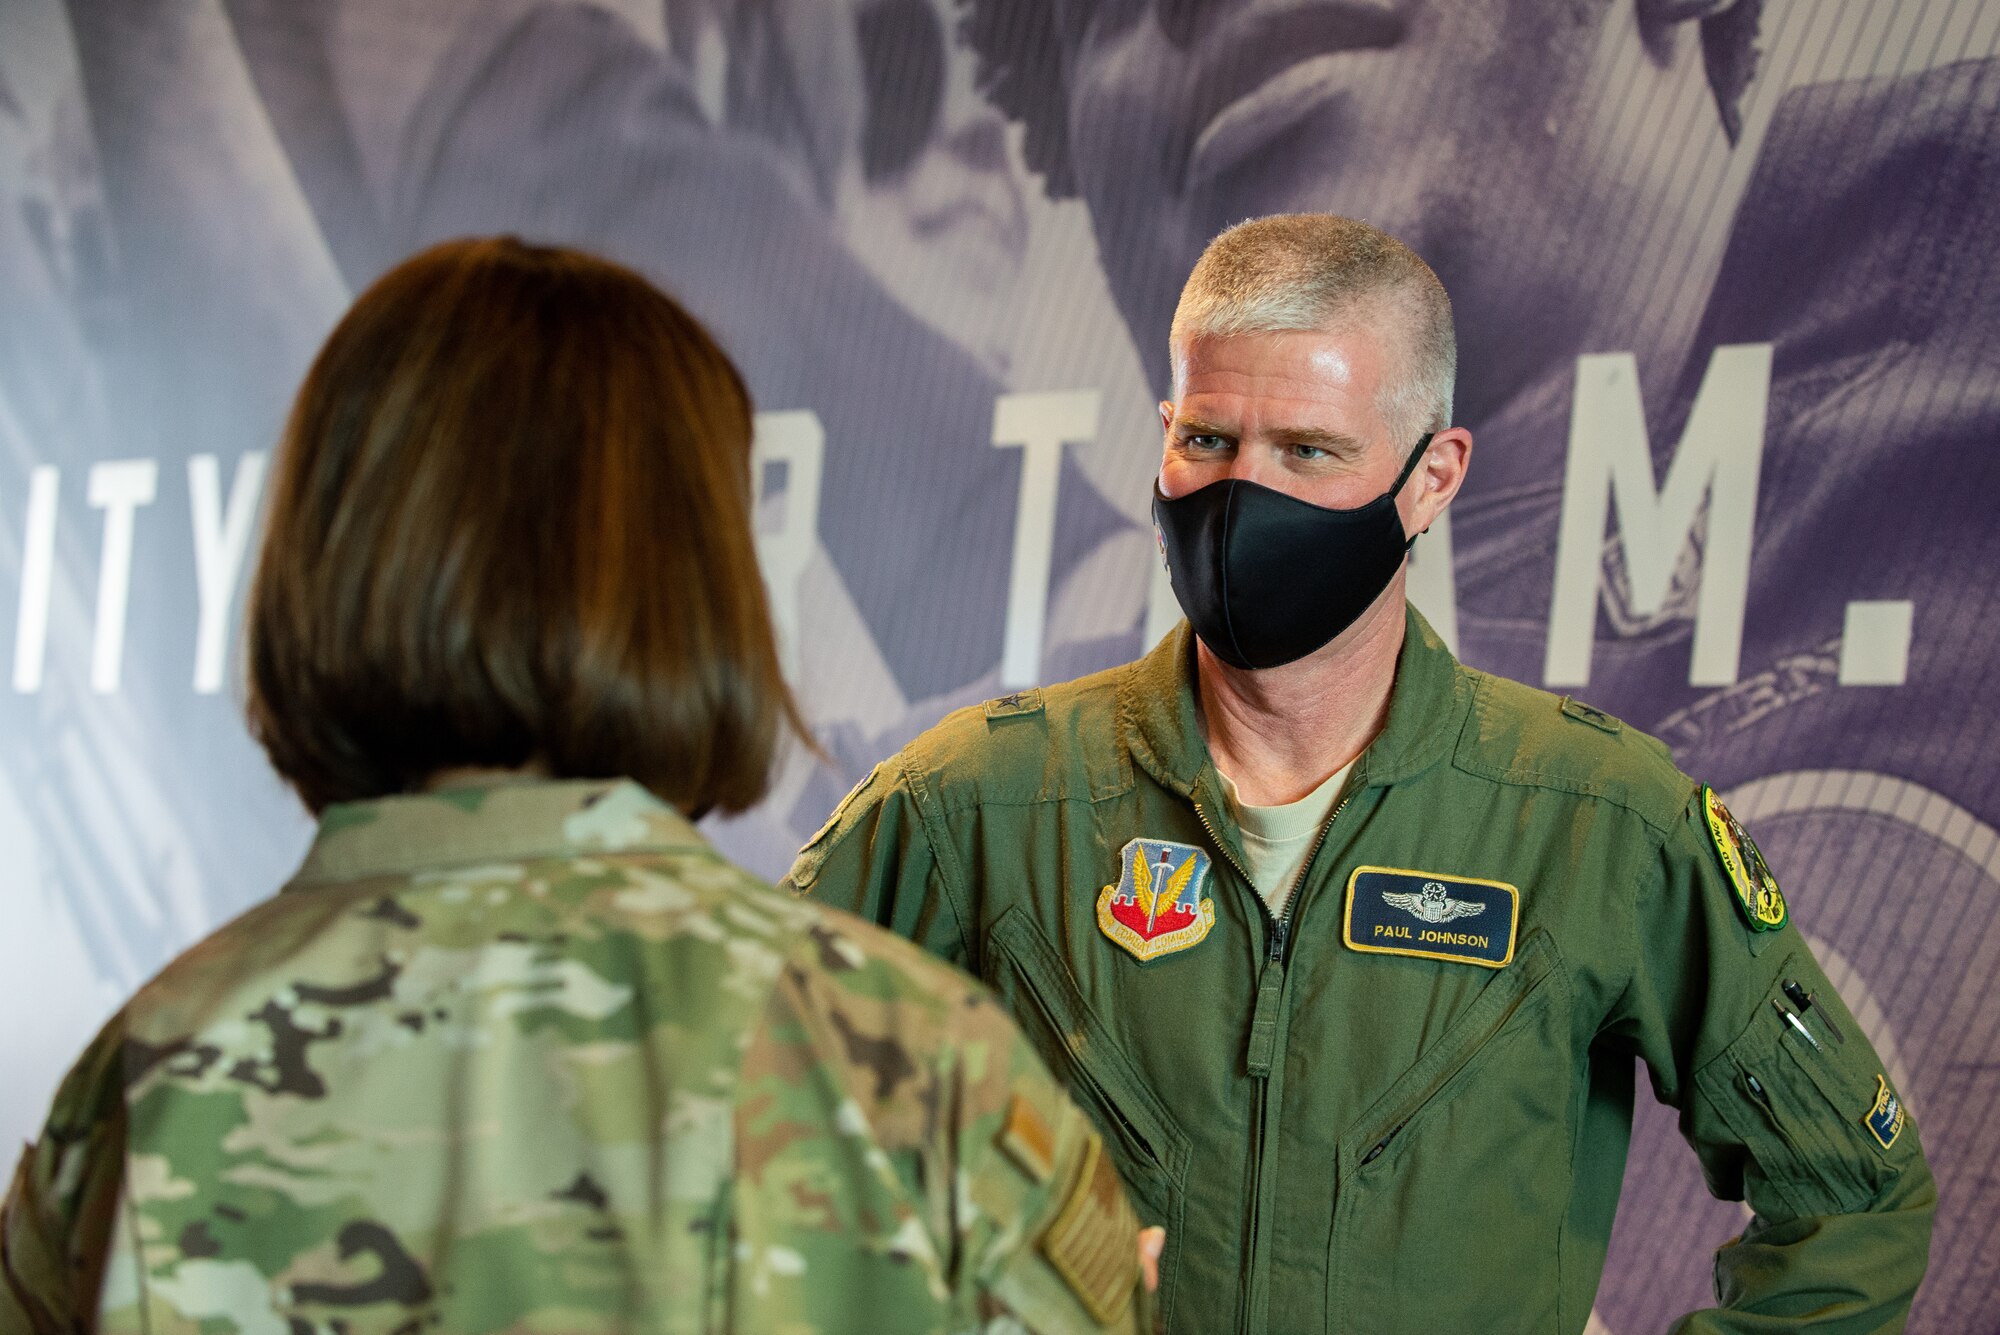 U.S. Air Force Brig. Gen. Paul Johnson, commander of the 175th Wing, speaks to Chief Master Sgt. of the Air Force JoAnne S. Bass at M&T Bank Stadium, Baltimore, on May 3, 2021.